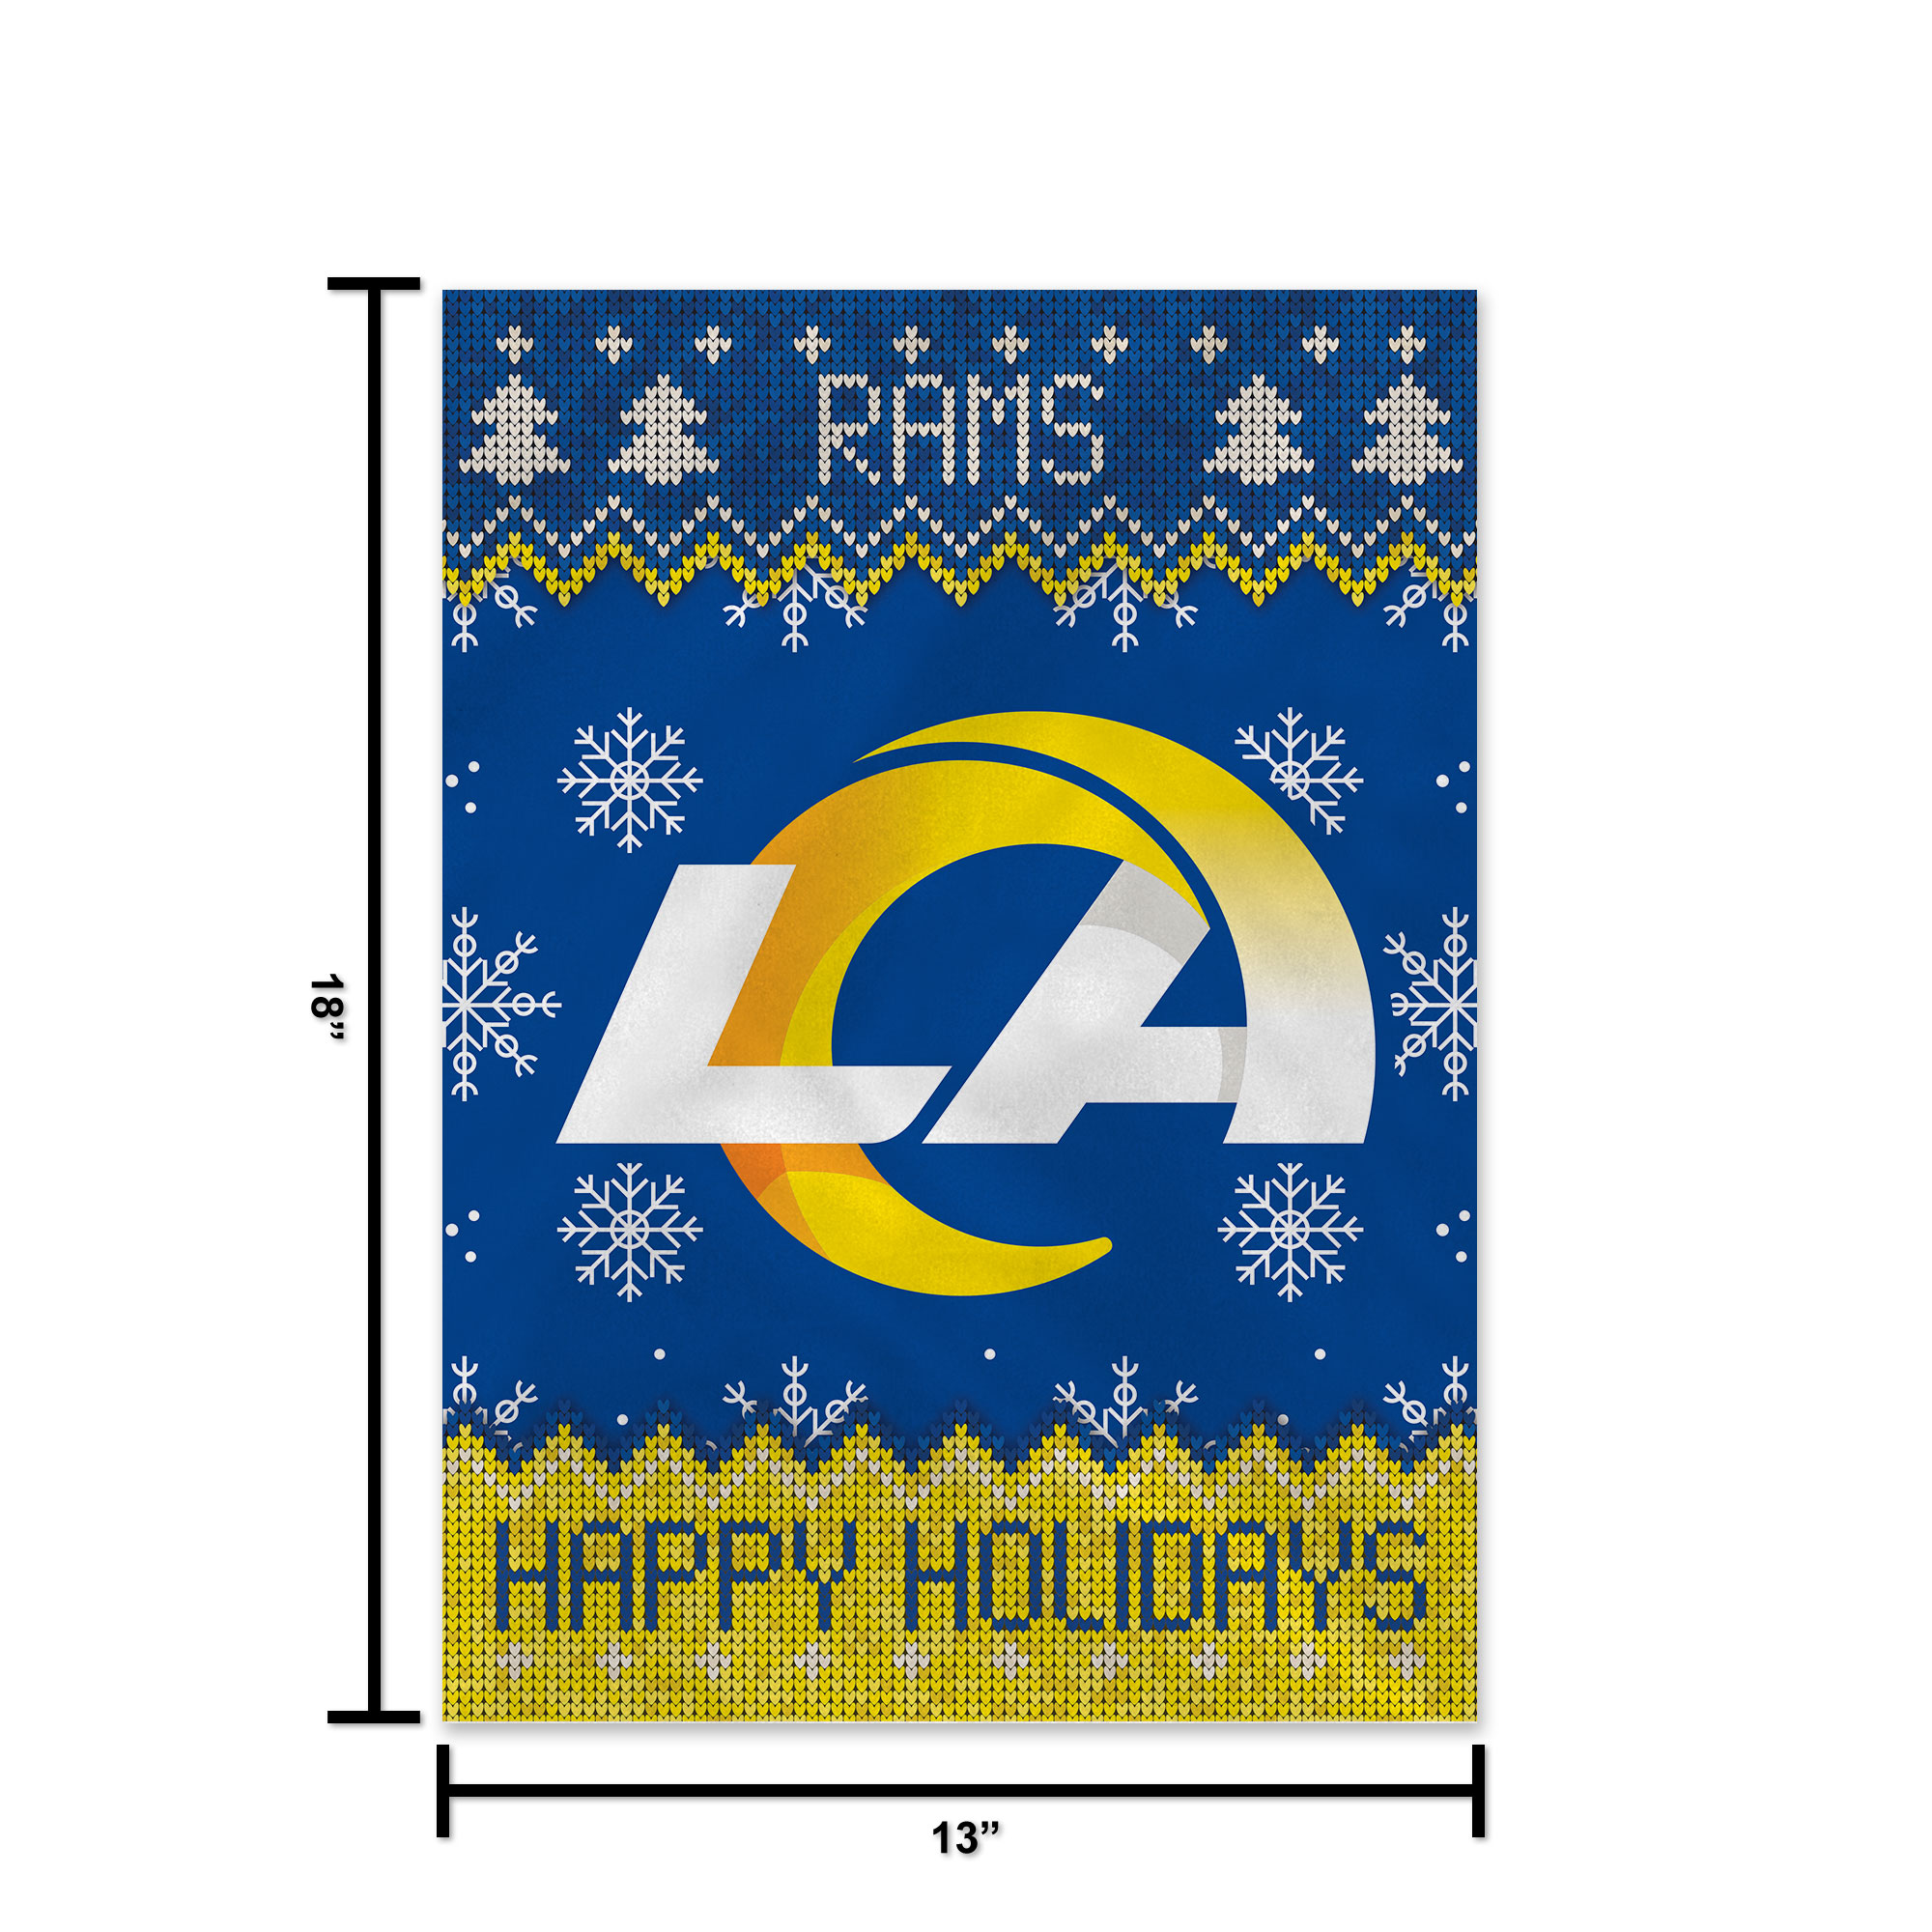 Rico Industries NFL Football Los Angeles Rams Winter/Snowflake Double Sided Garden Flag